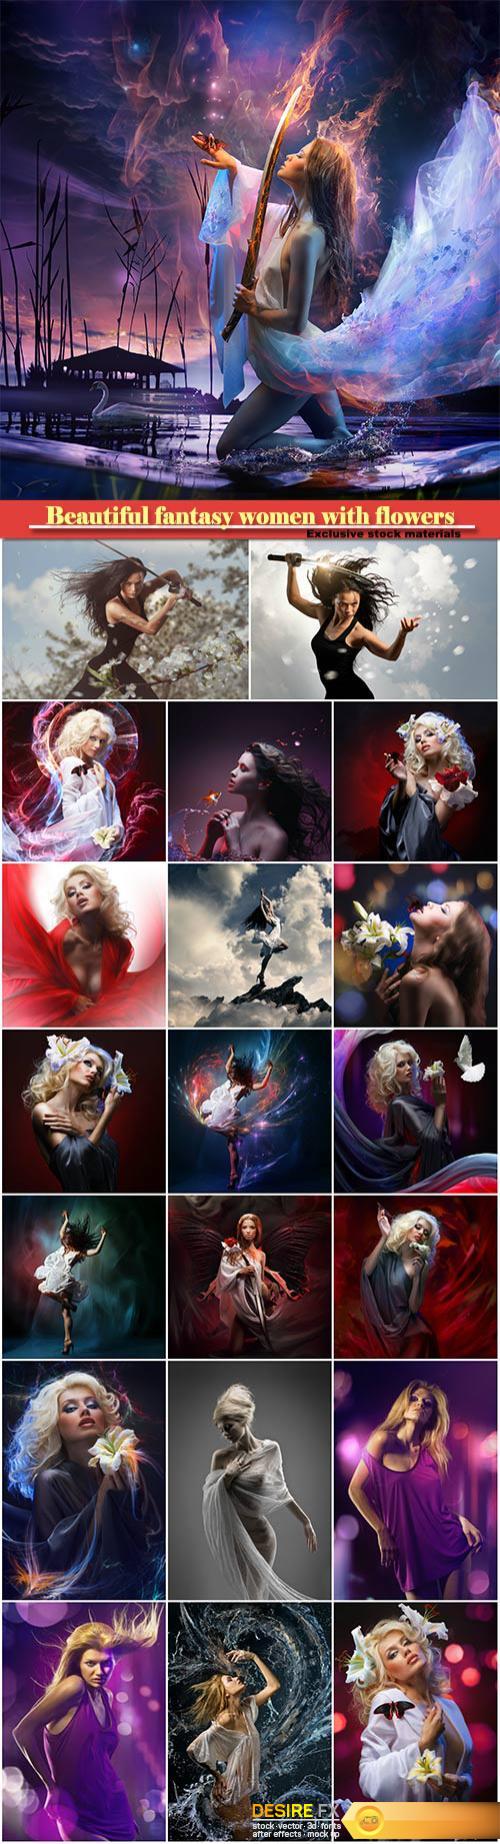 Beautiful fantasy women with flowers and butterflies